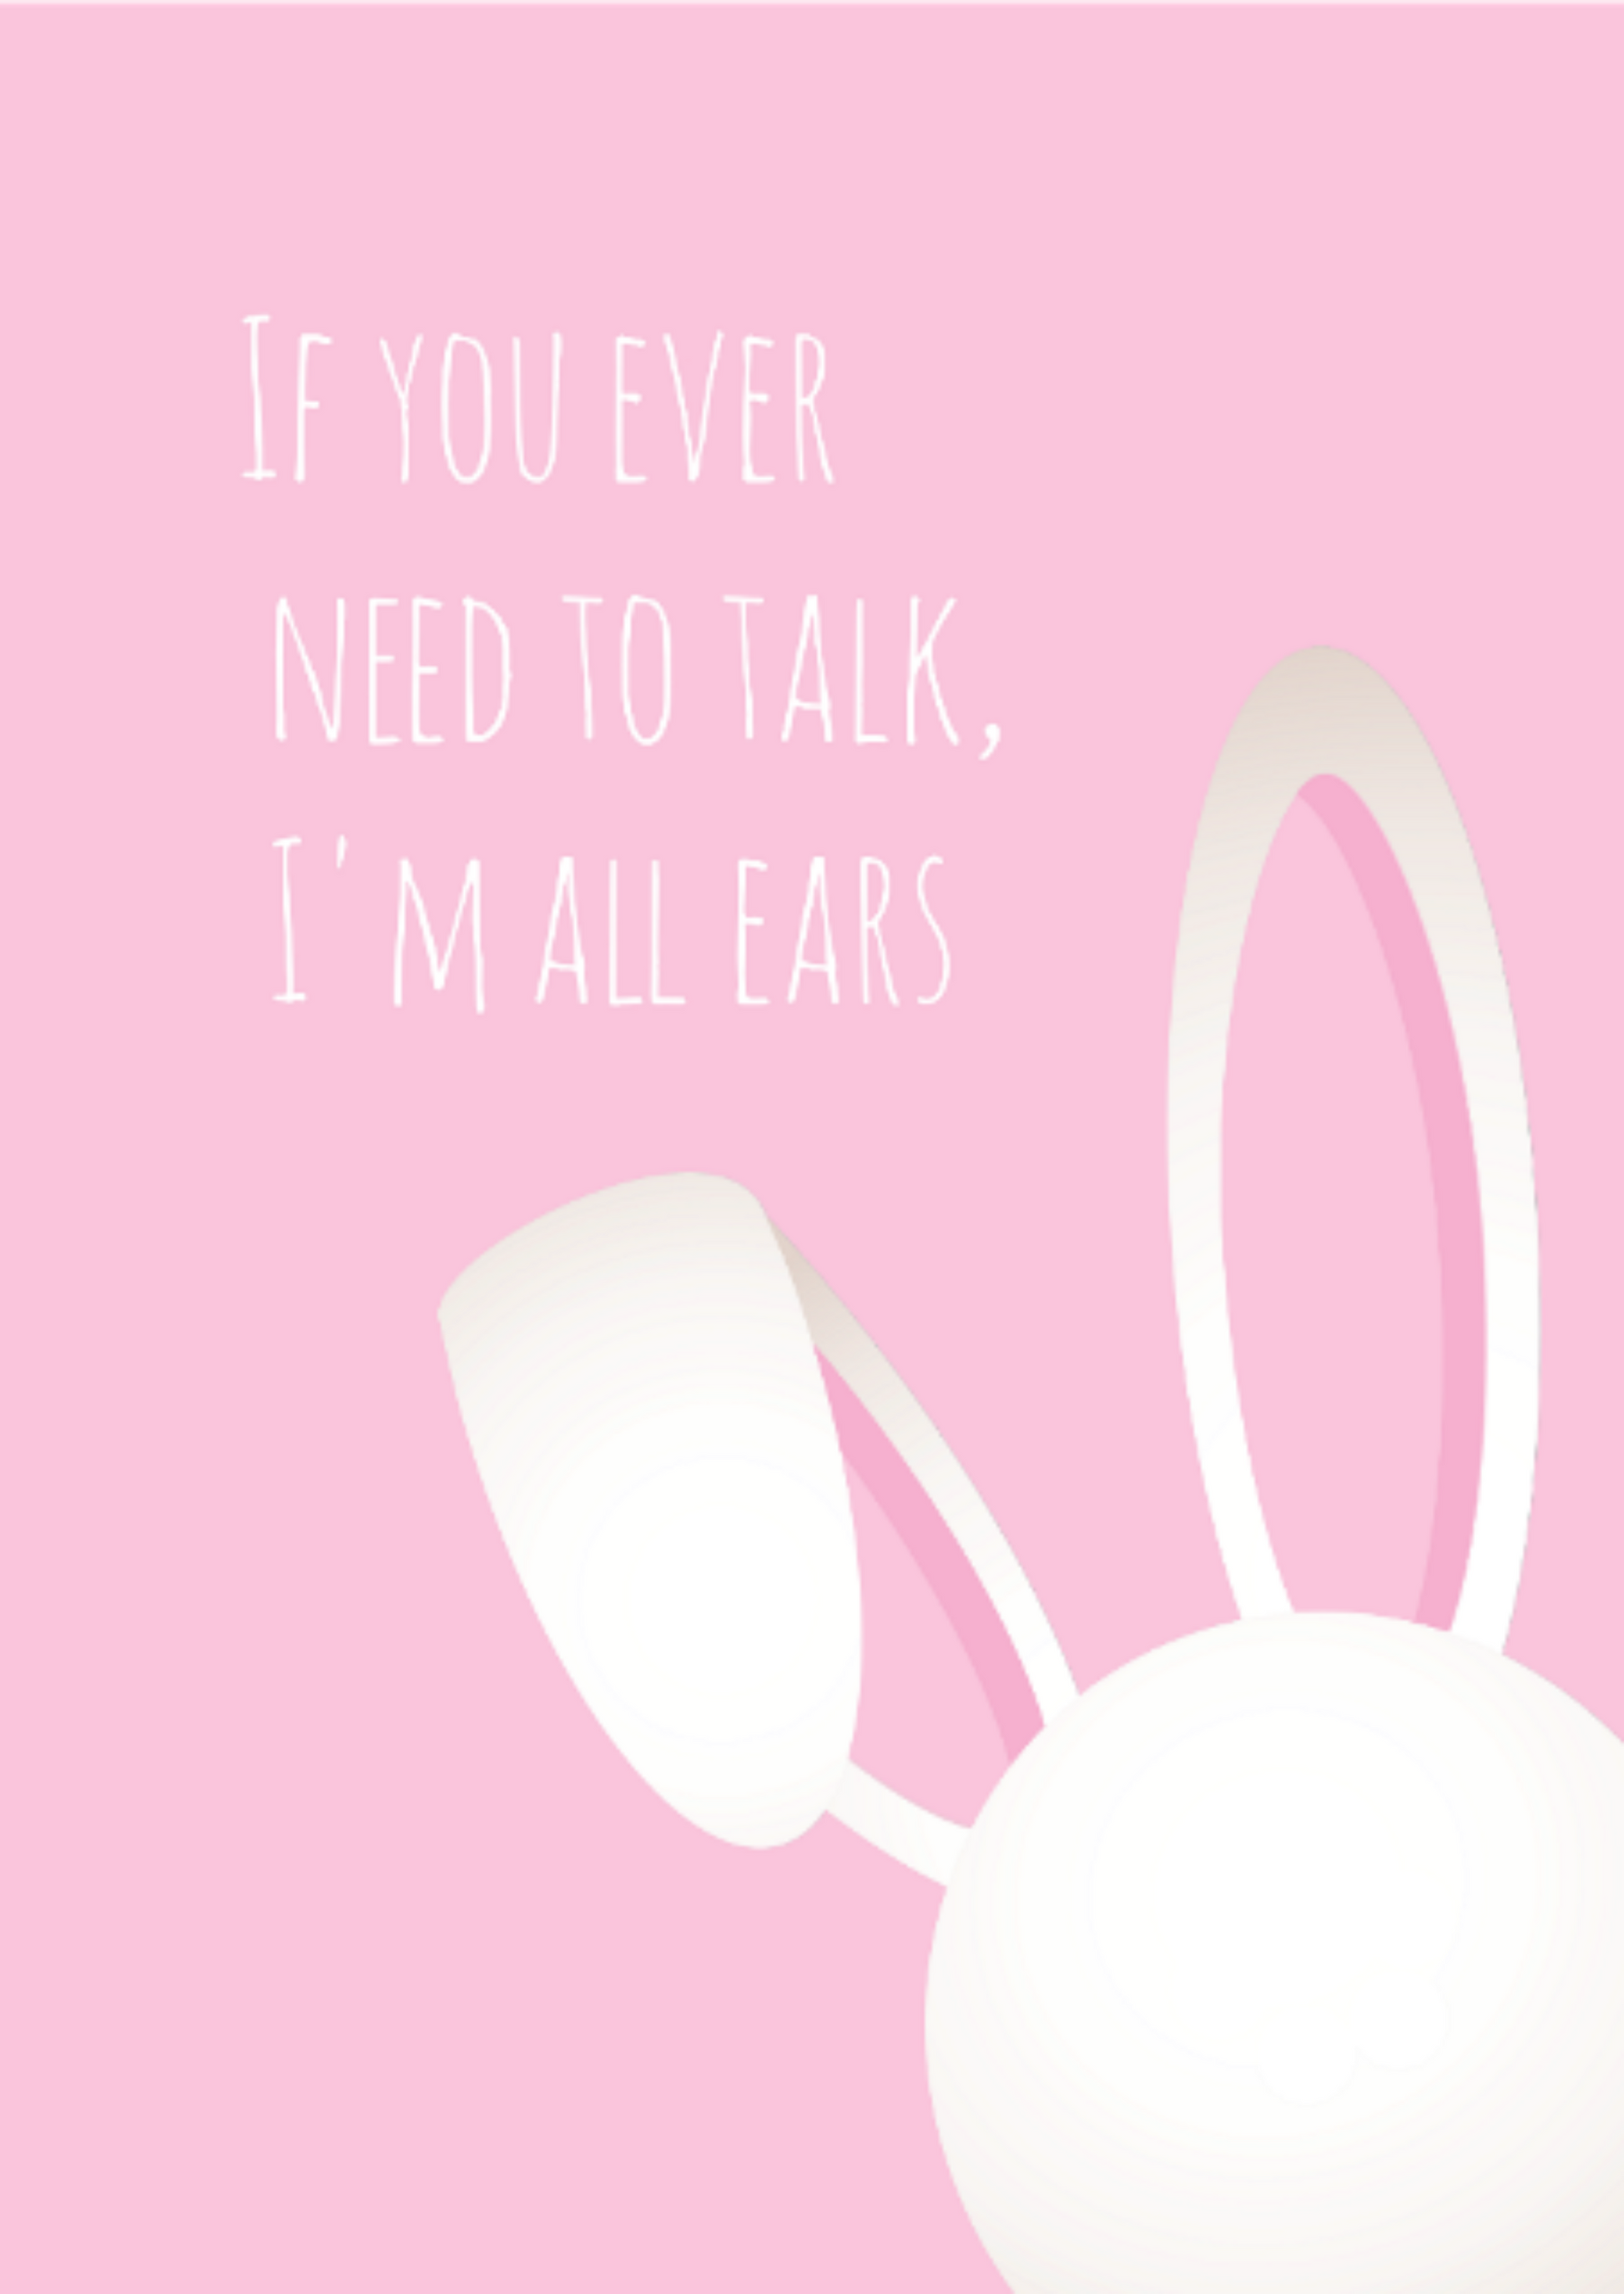 If You Ever Need To Talk, I'm All Ears - Thinking Of You Greeting Card - Encouragement.